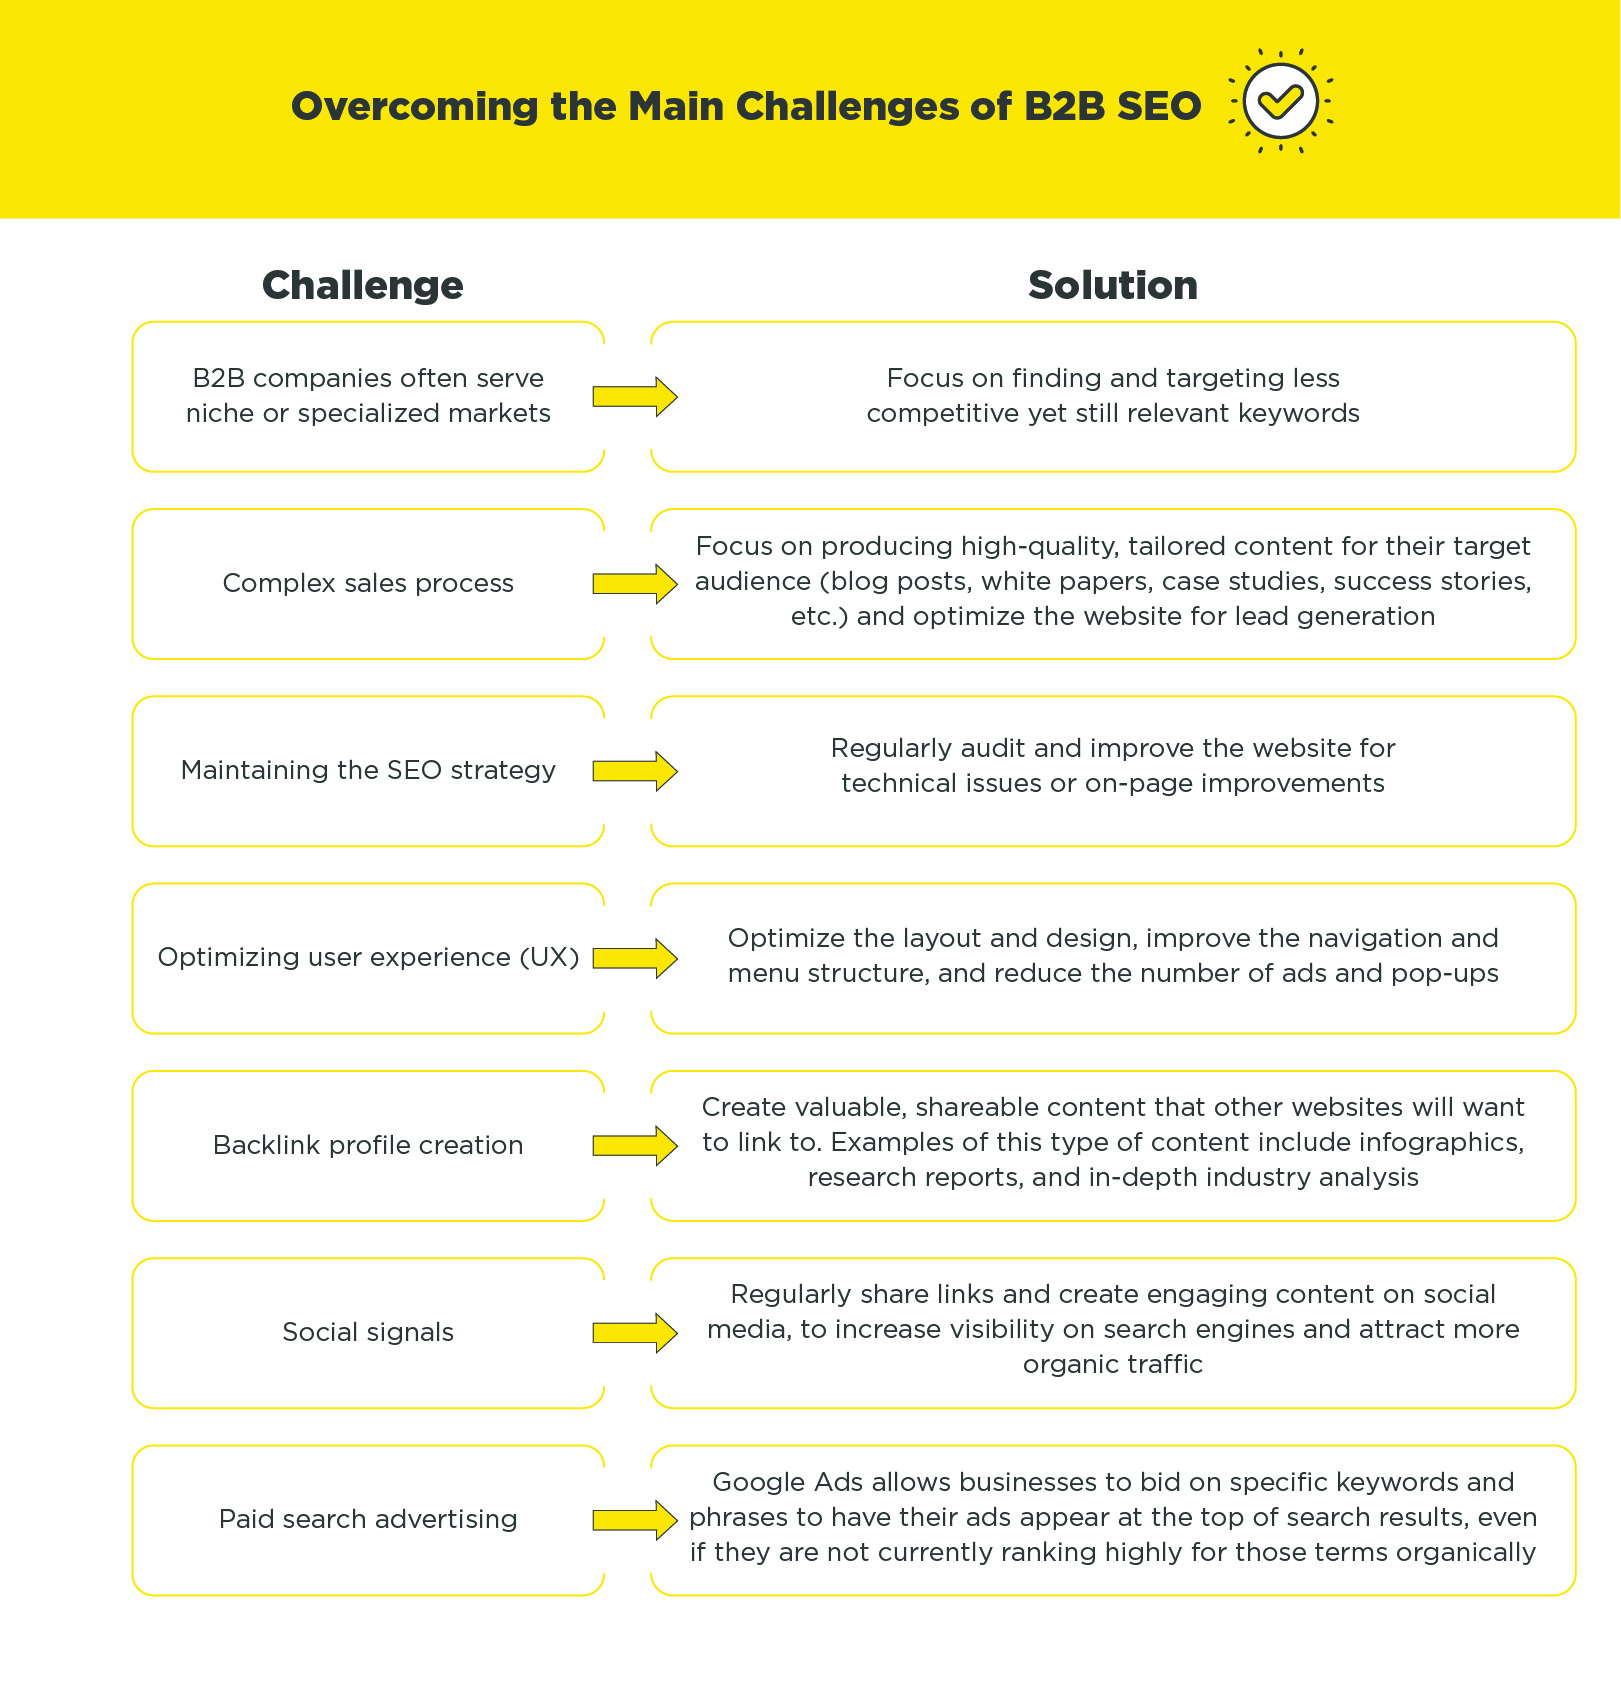 Solutions to main challenges B2B SEO